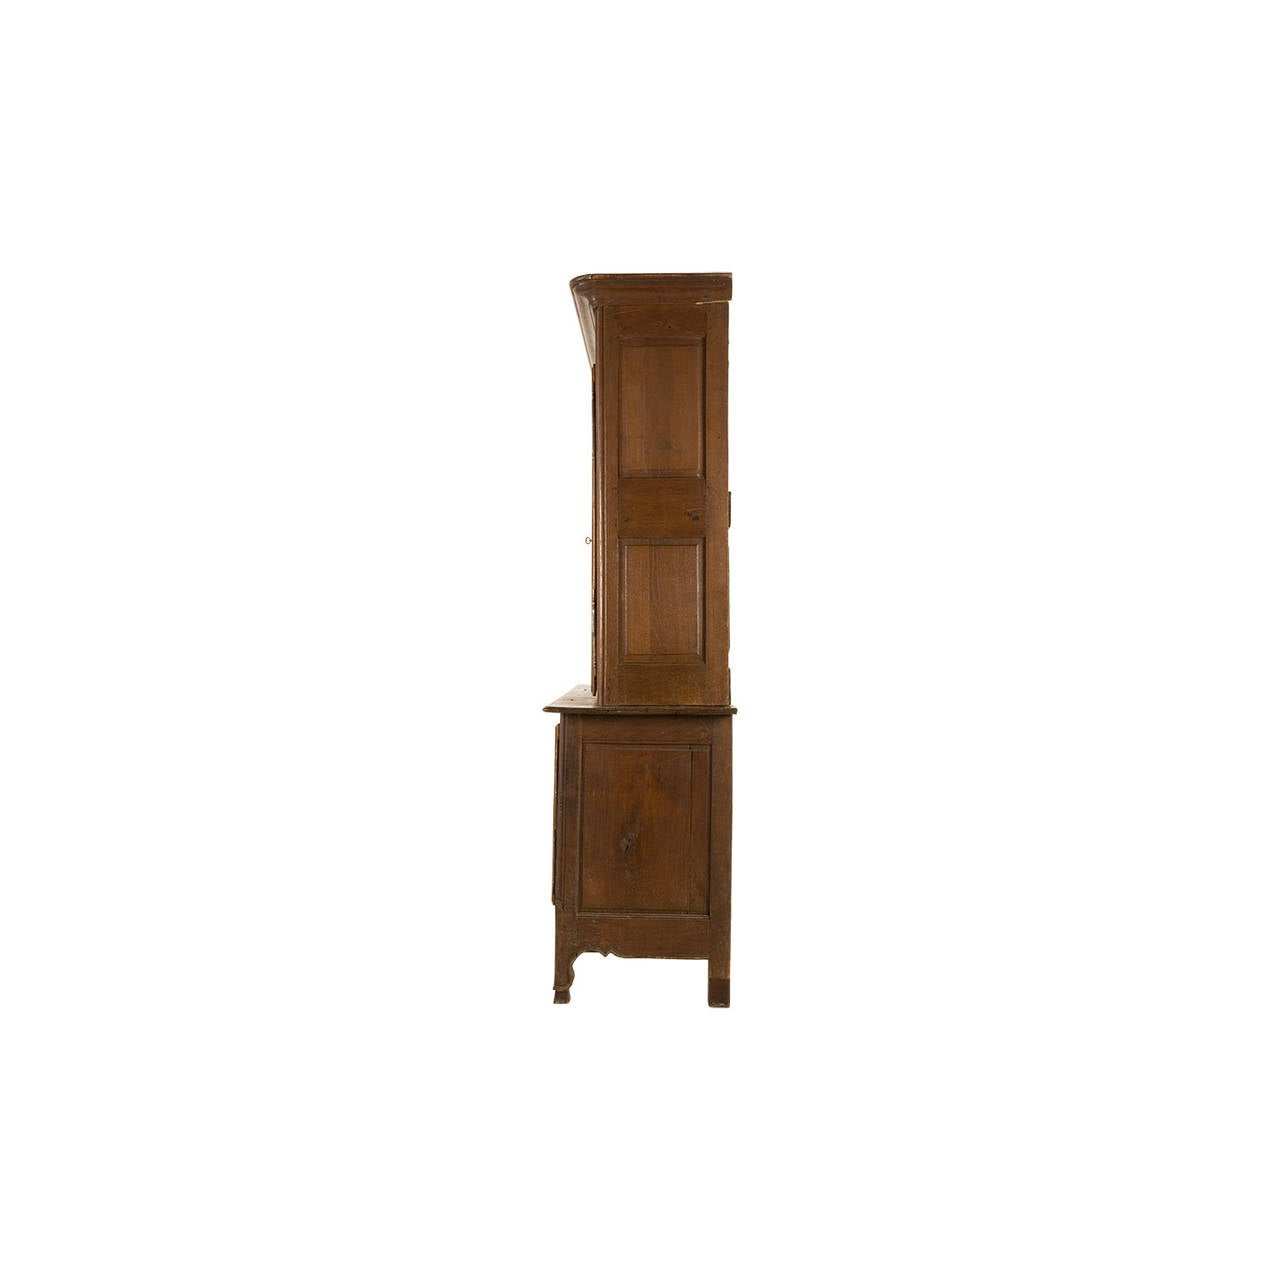 19th Century Antique French Break-Front Cabinet